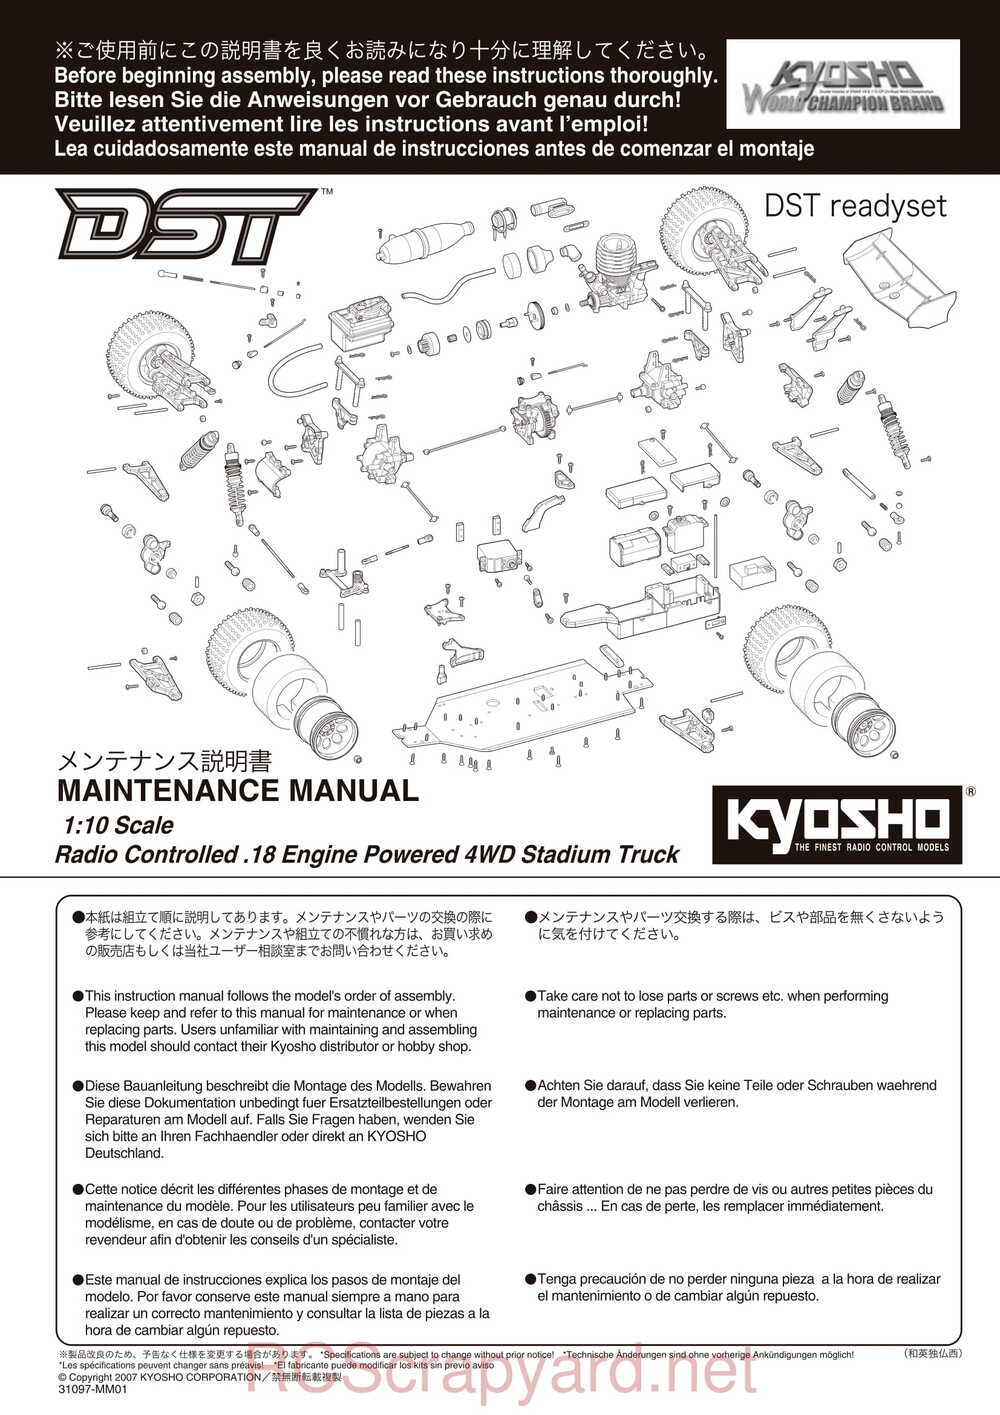 Kyosho - 31097 - DST - Manual - Page 01